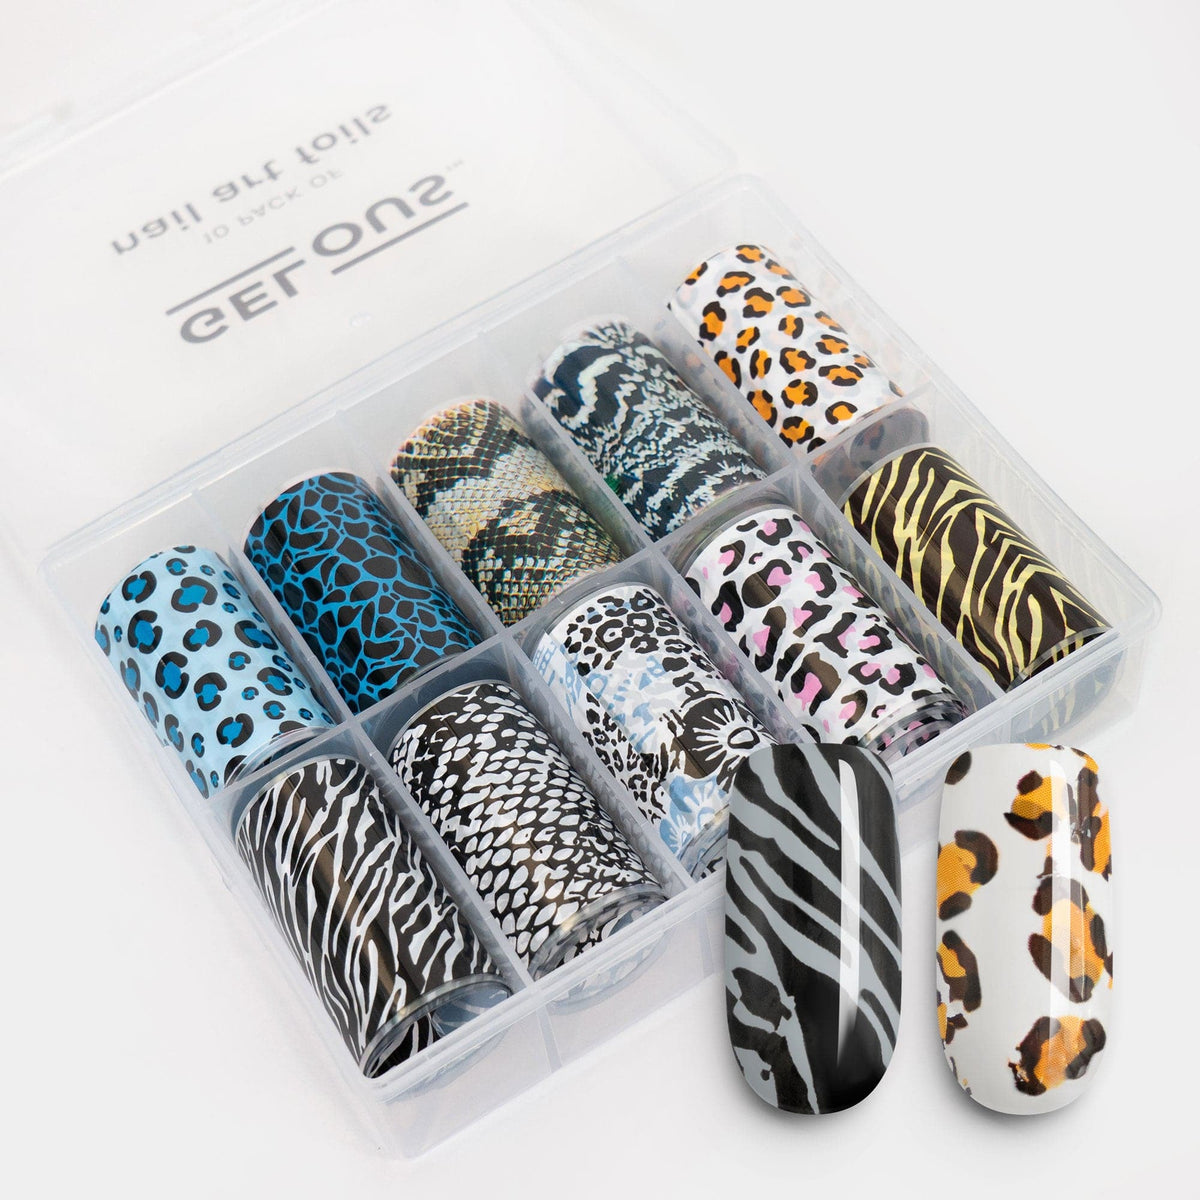 Gelous Be Wild Nail Art Foils product photo - photographed in Australia